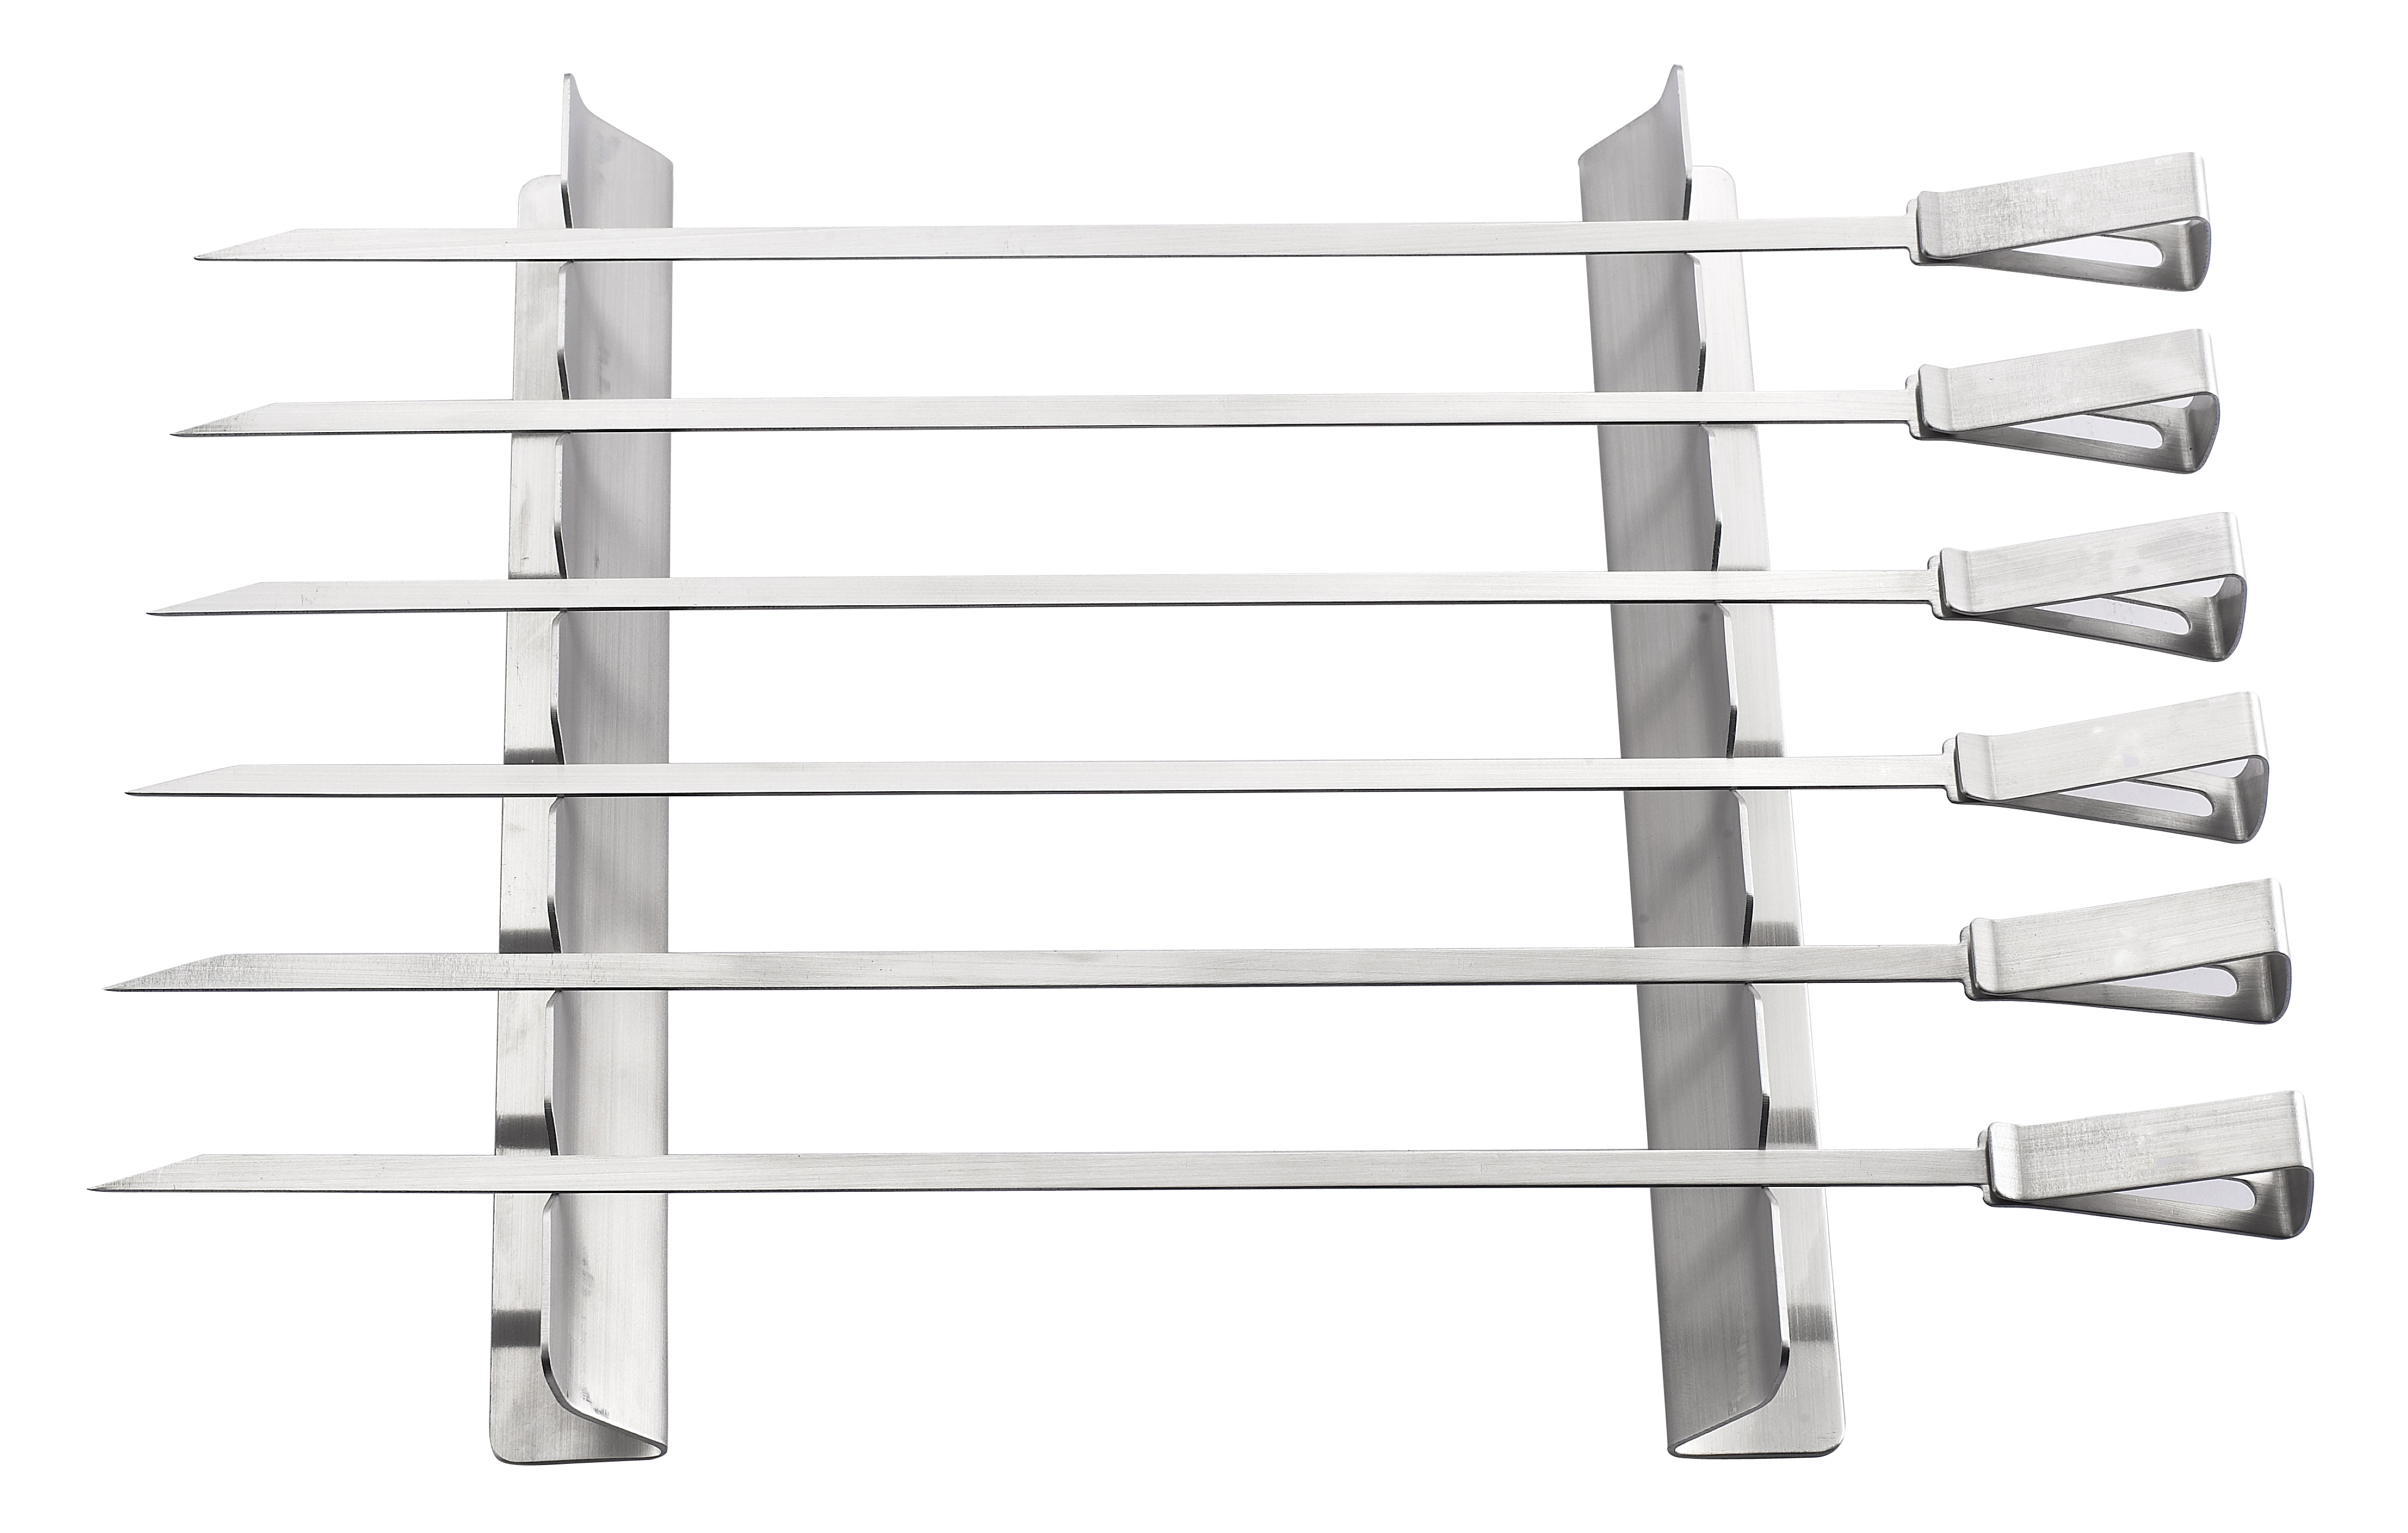 BBQ 870007 Grilling Kabob Rack with 6 Wide Skewers, Stainless Steel